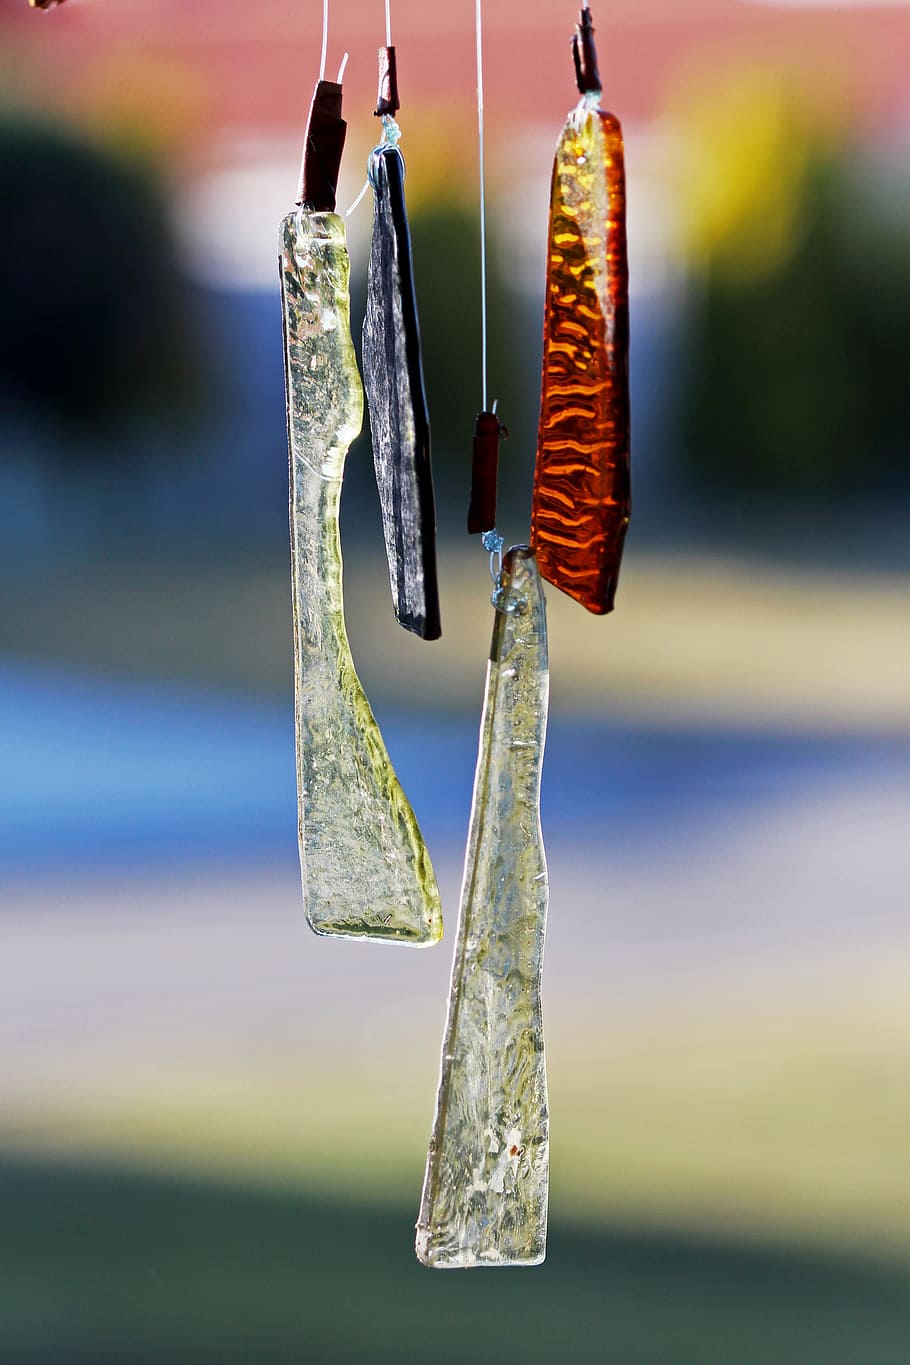 wind chimes, glass, outdoors, hanging, summer, bokeh, leisure, calming, soothing, chime